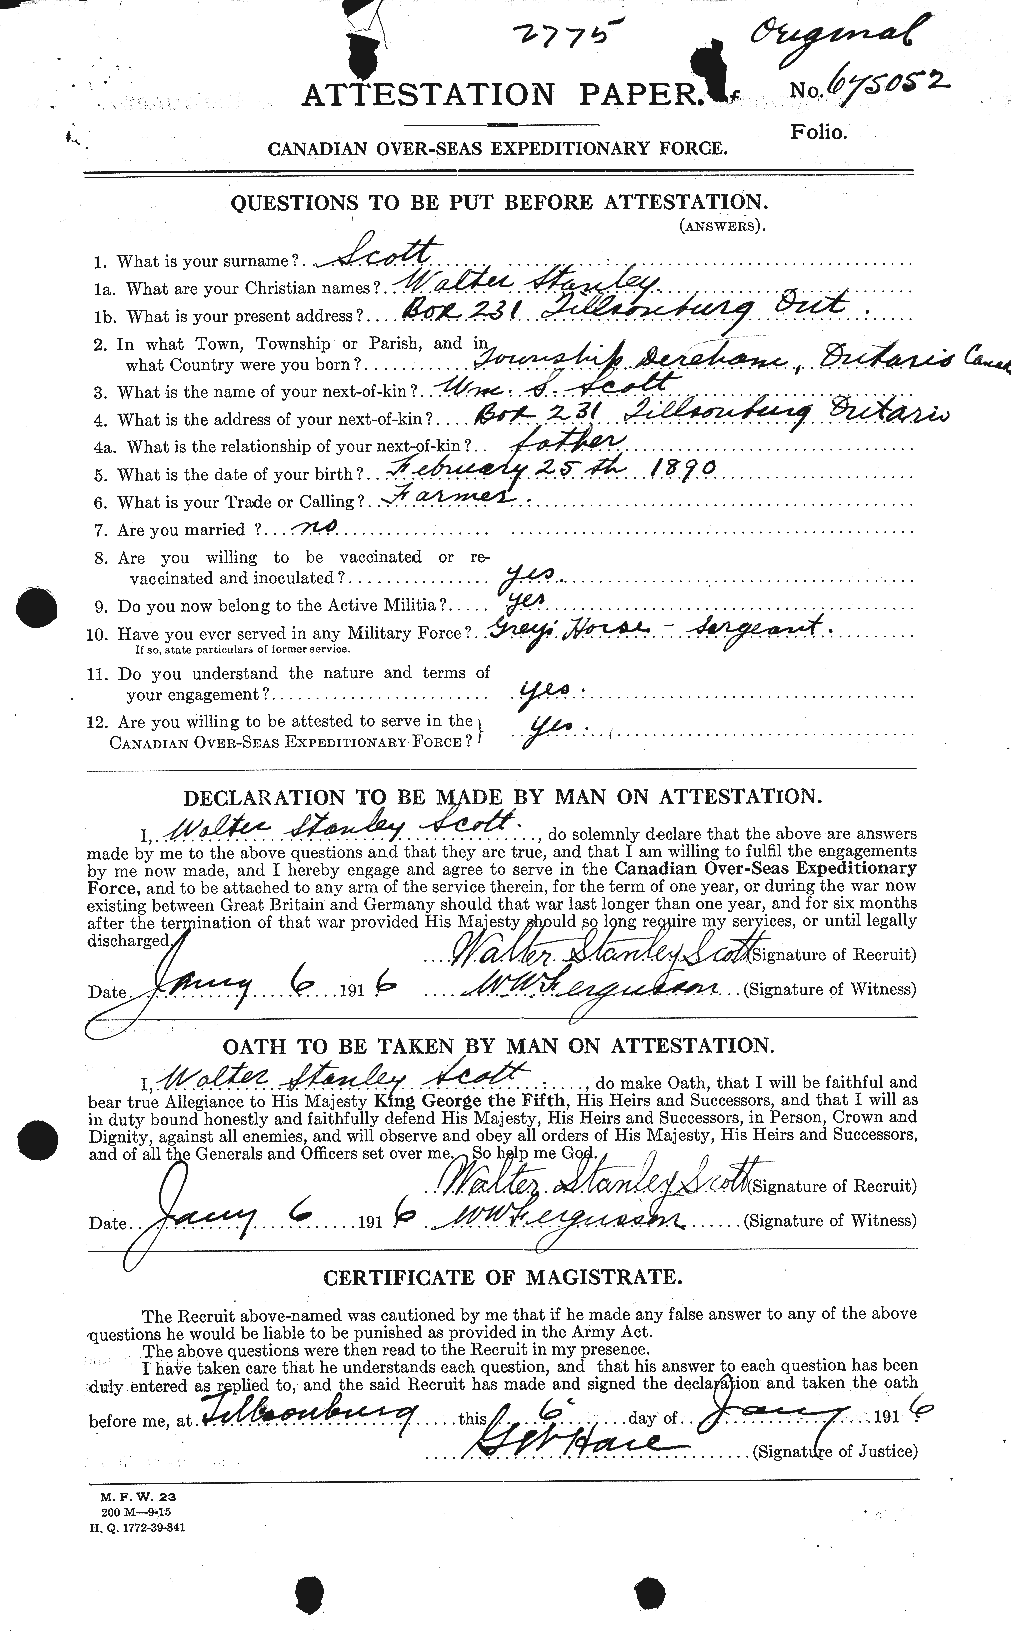 Personnel Records of the First World War - CEF 087690a